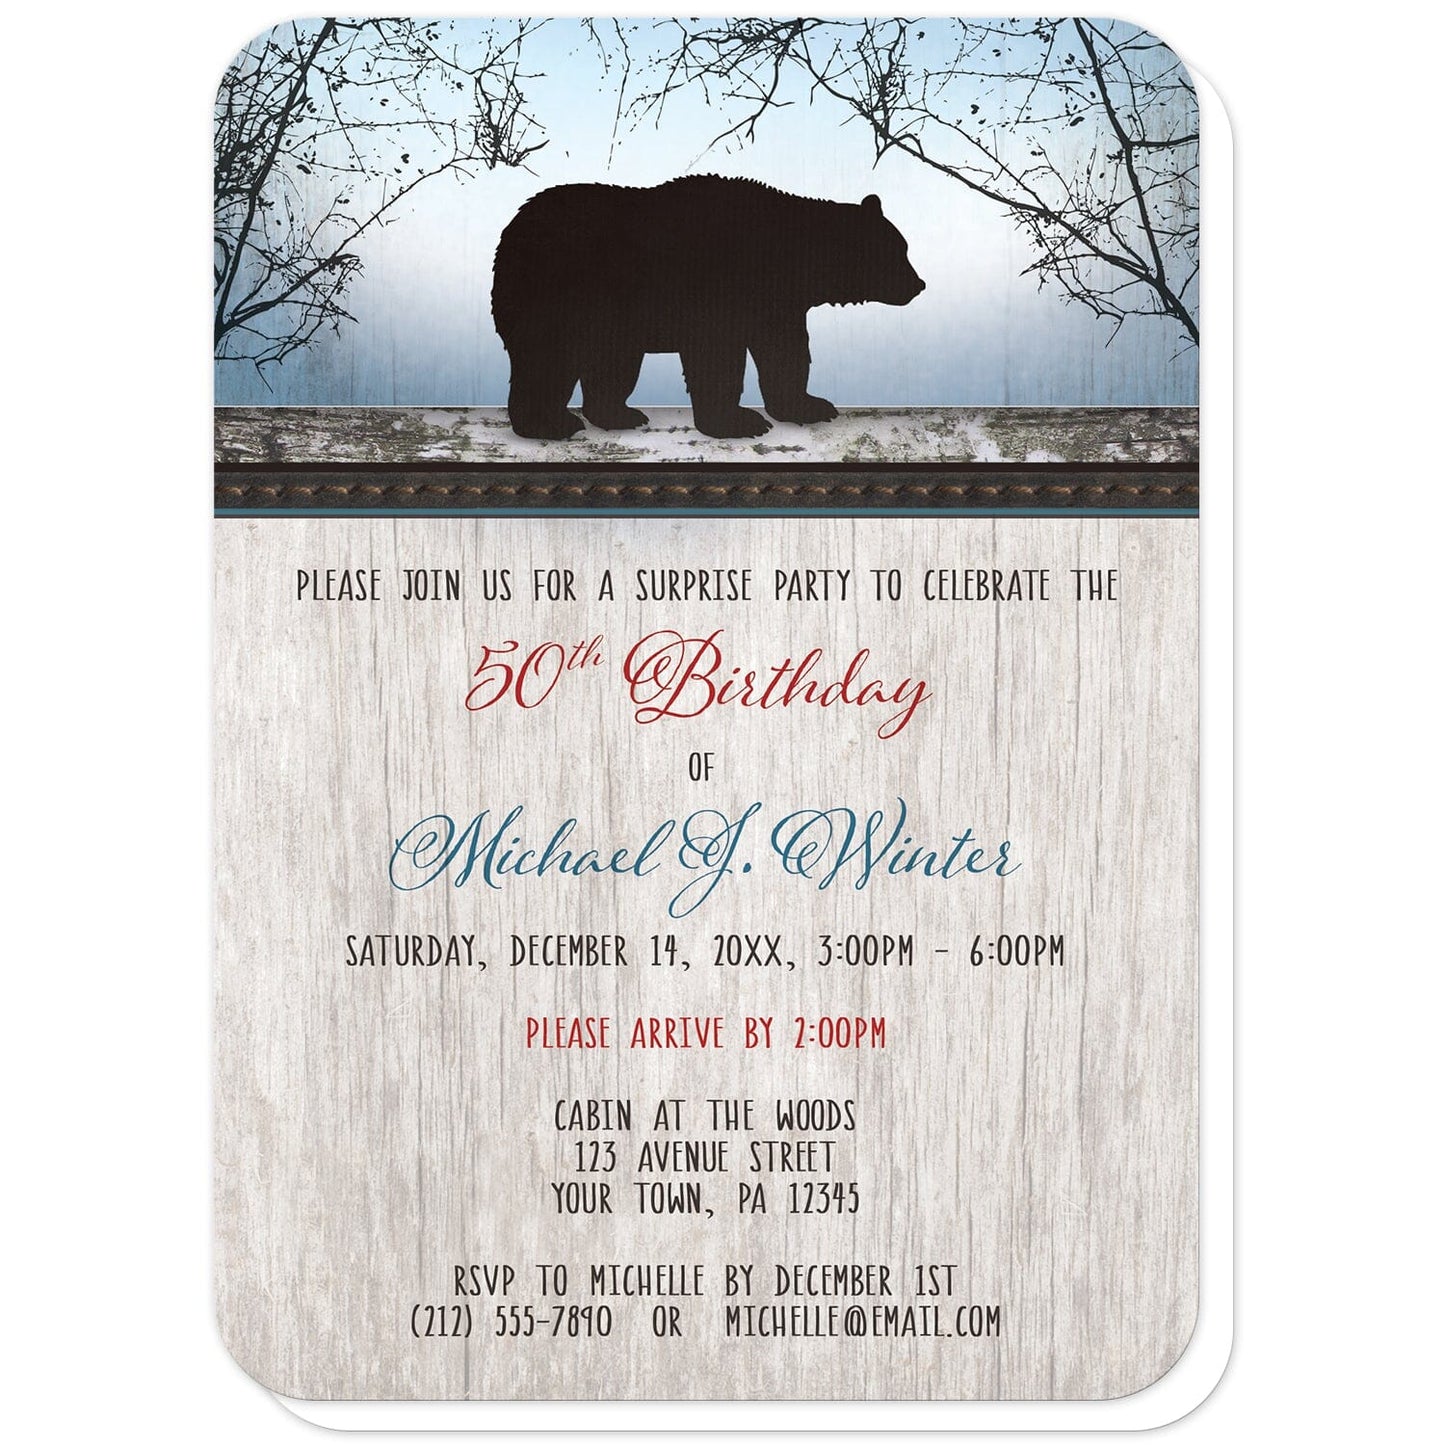 Rustic Bear Wood Red Blue Birthday Invitations (with rounded corners) at Artistically Invited. Rustic bear wood red blue birthday invitations with a dark silhouette bear on wooden log at the top, over a blue background with trees and a wood watermark. Your personalized surprise party details are custom printed in red, blue, and dark brown over a light rustic wood texture background below the bear design. You may also select green text in place of the red text in the personalization. 